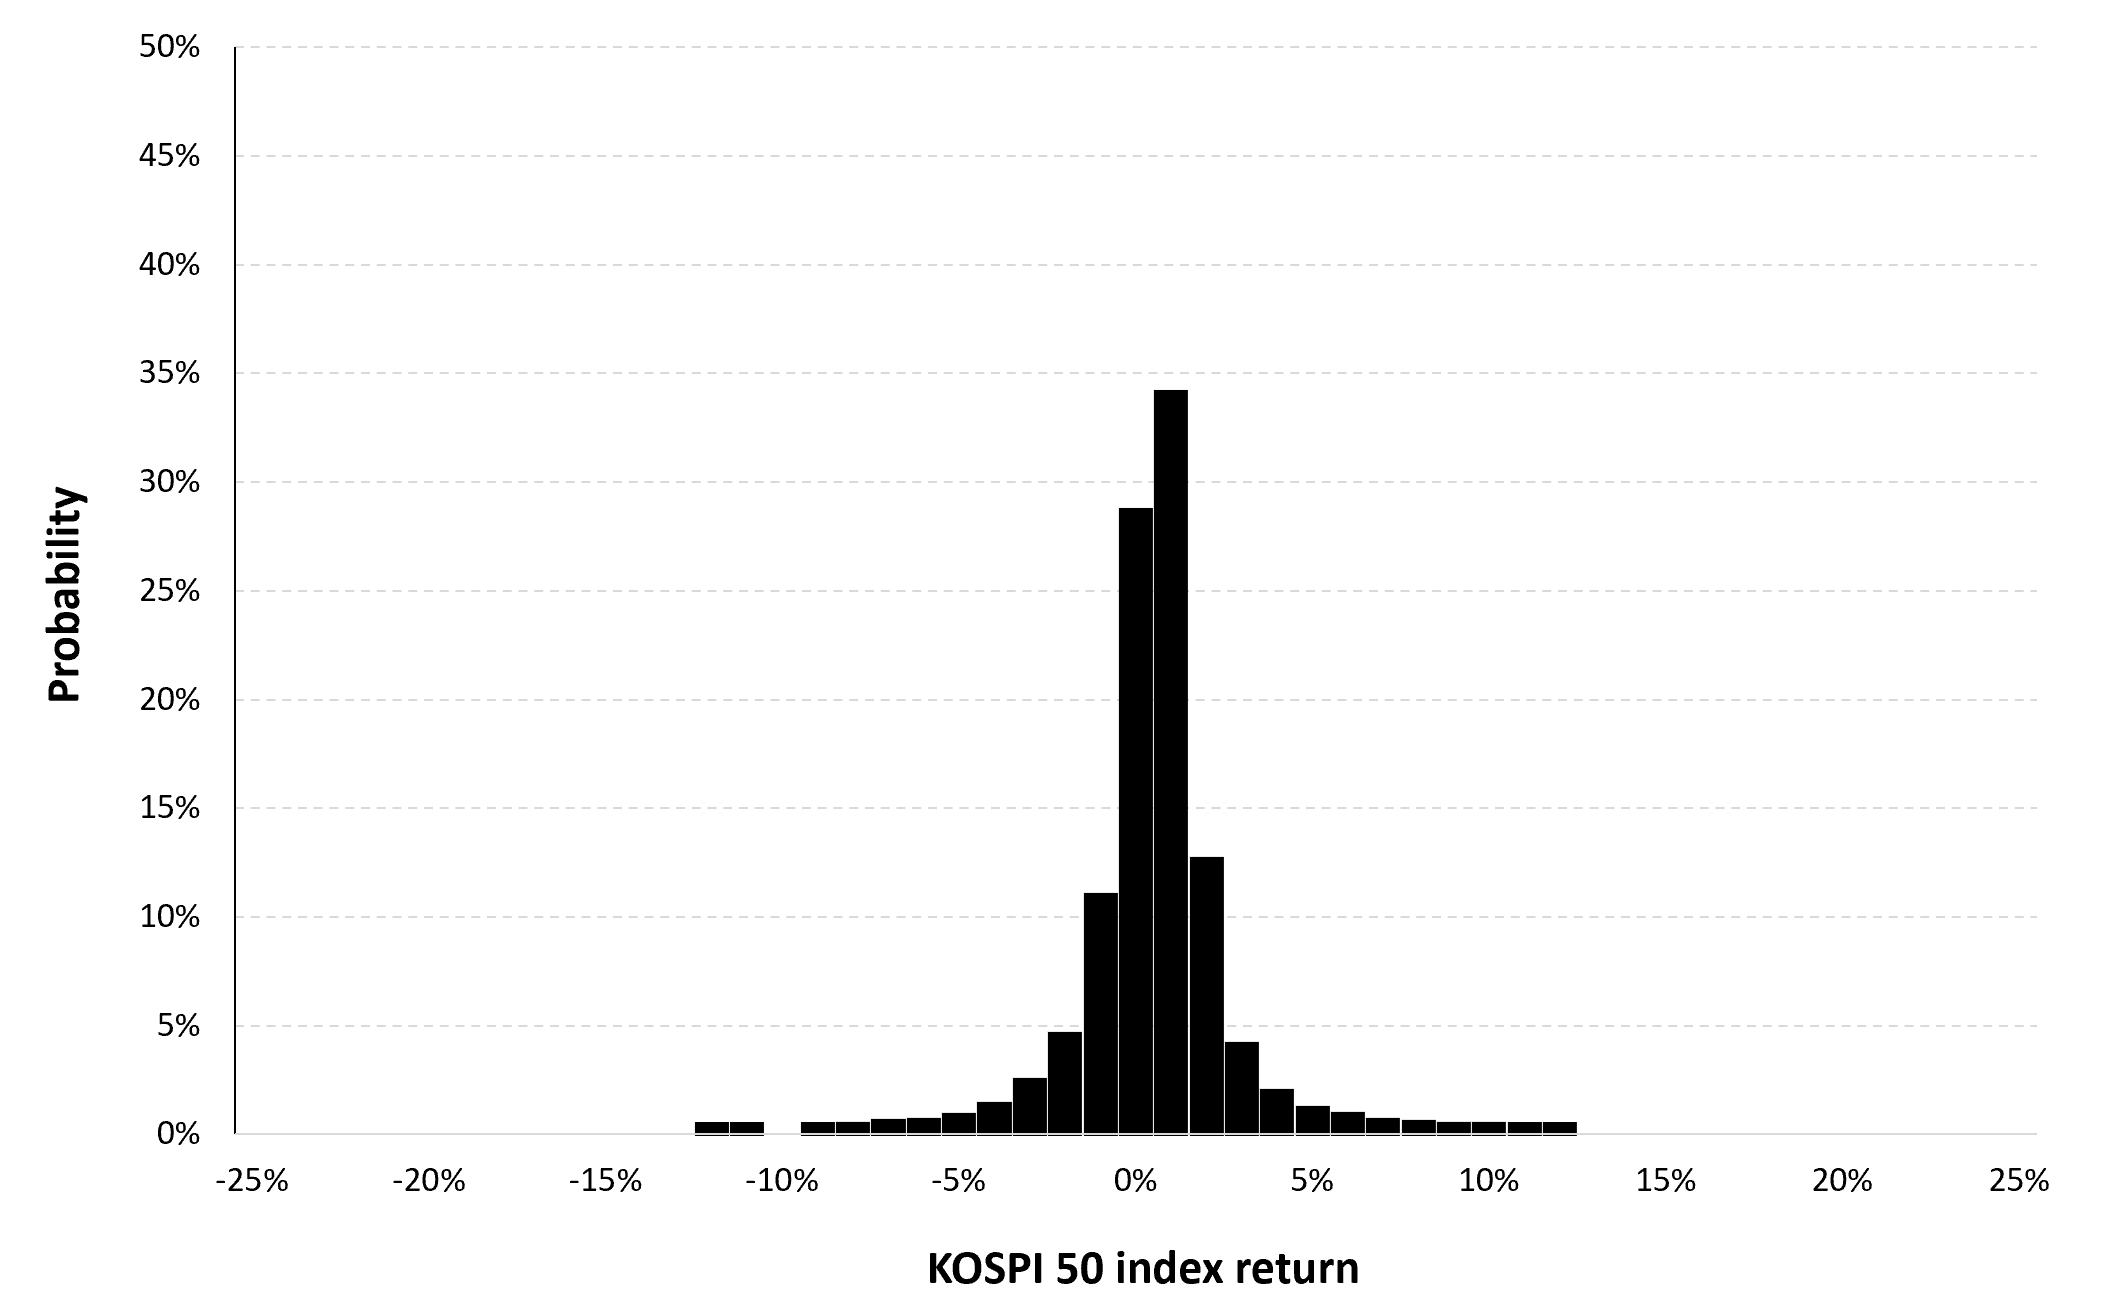 Historical distribution of the daily KOSPI 50 index returns